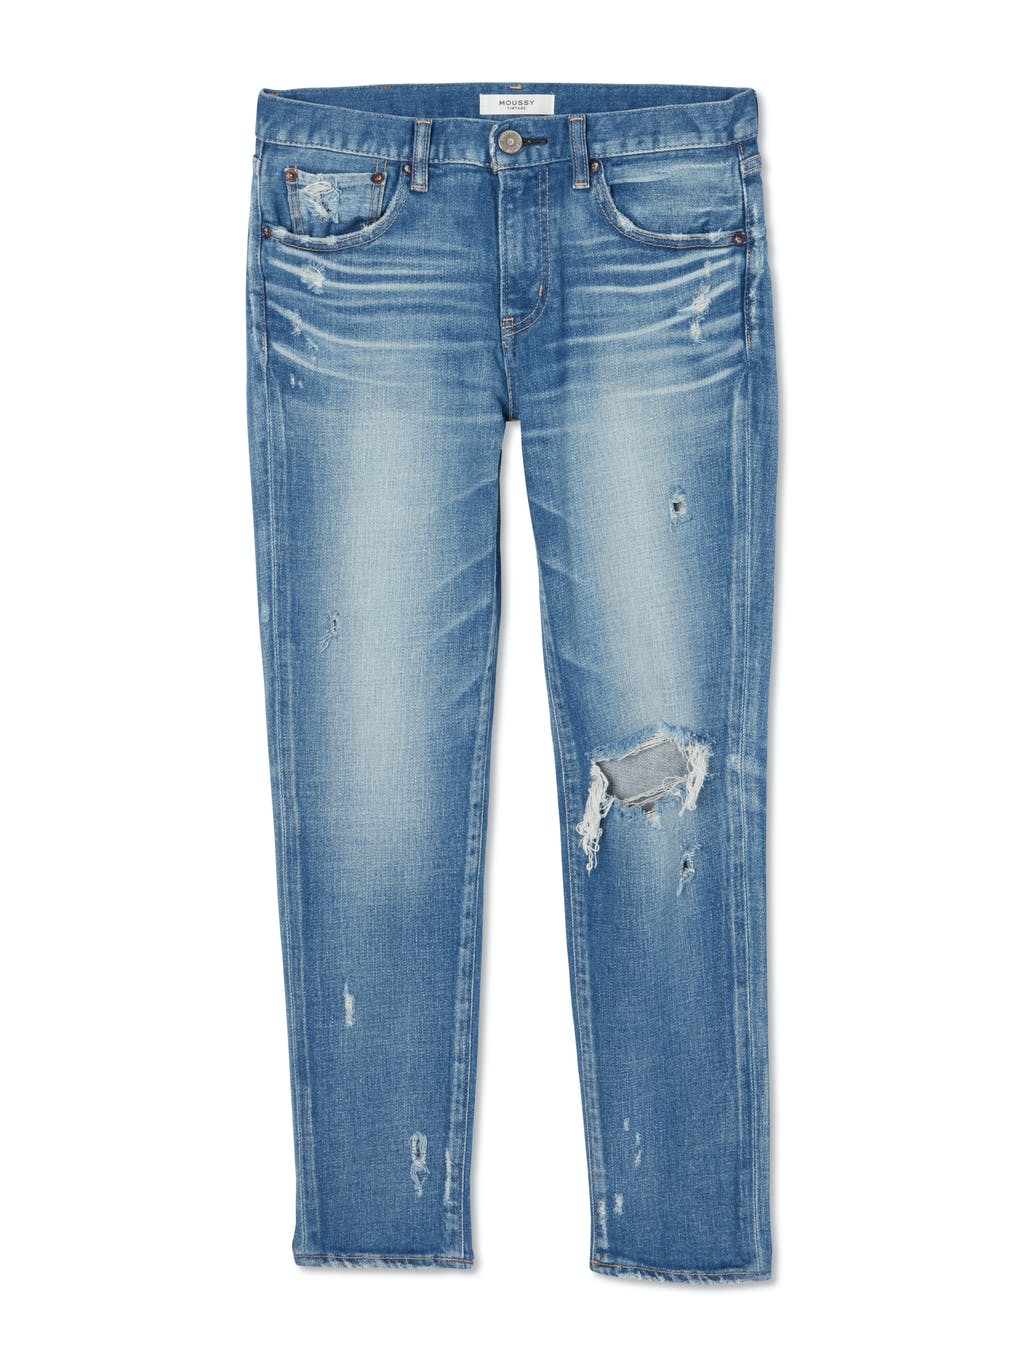 Helendale Mid Rise Deconstructed Skinny Ankle Jeans